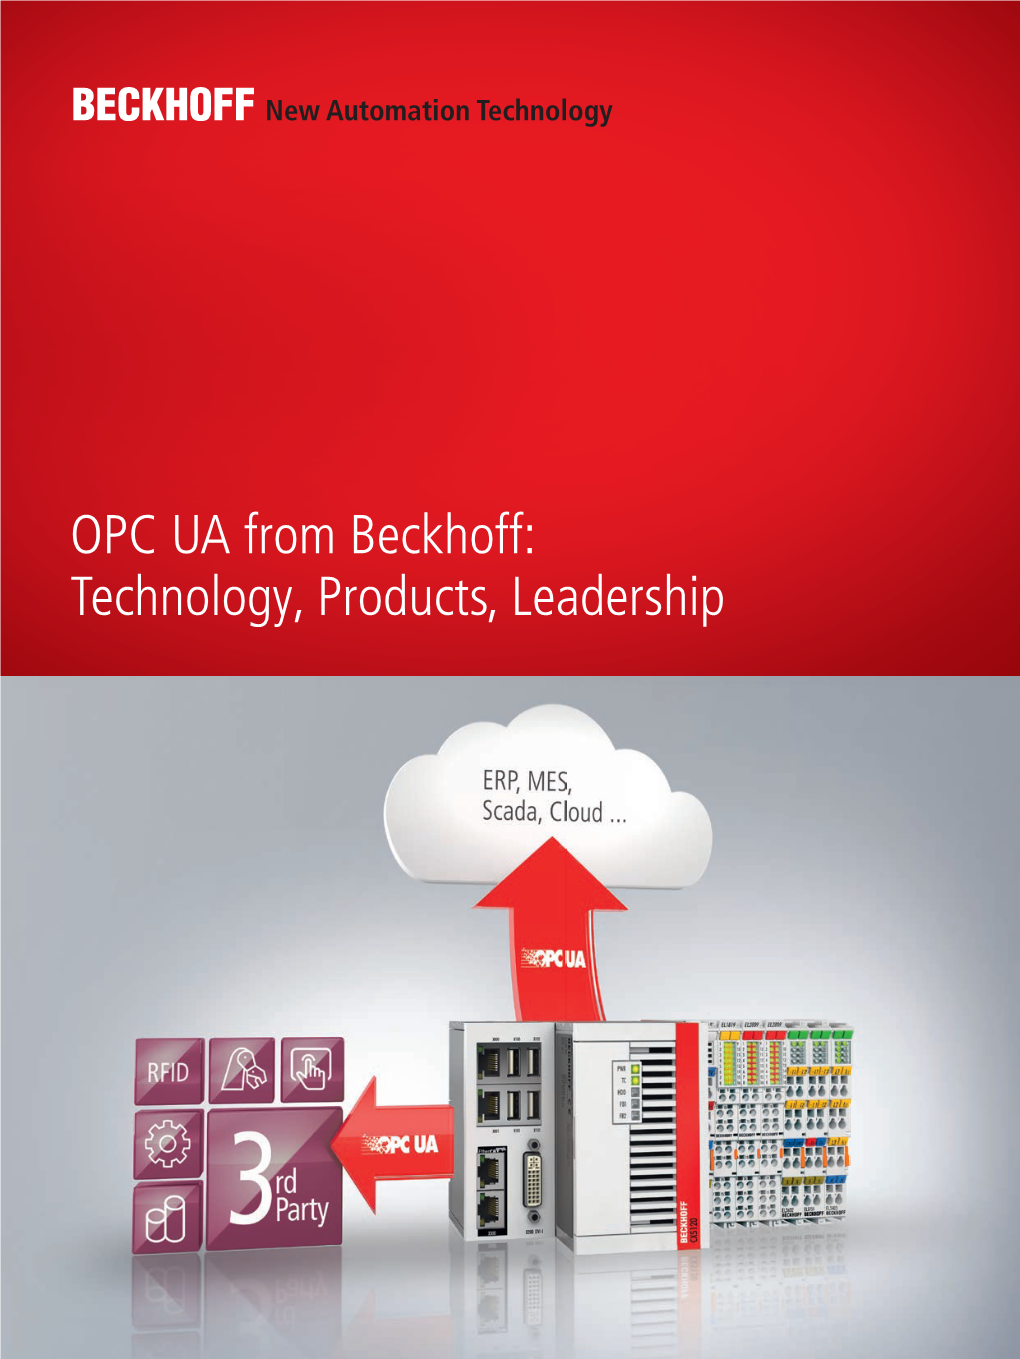 OPC UA from Beckhoff: Technology, Products, Leadership How Automation Benefits from OPC Unified Architecture